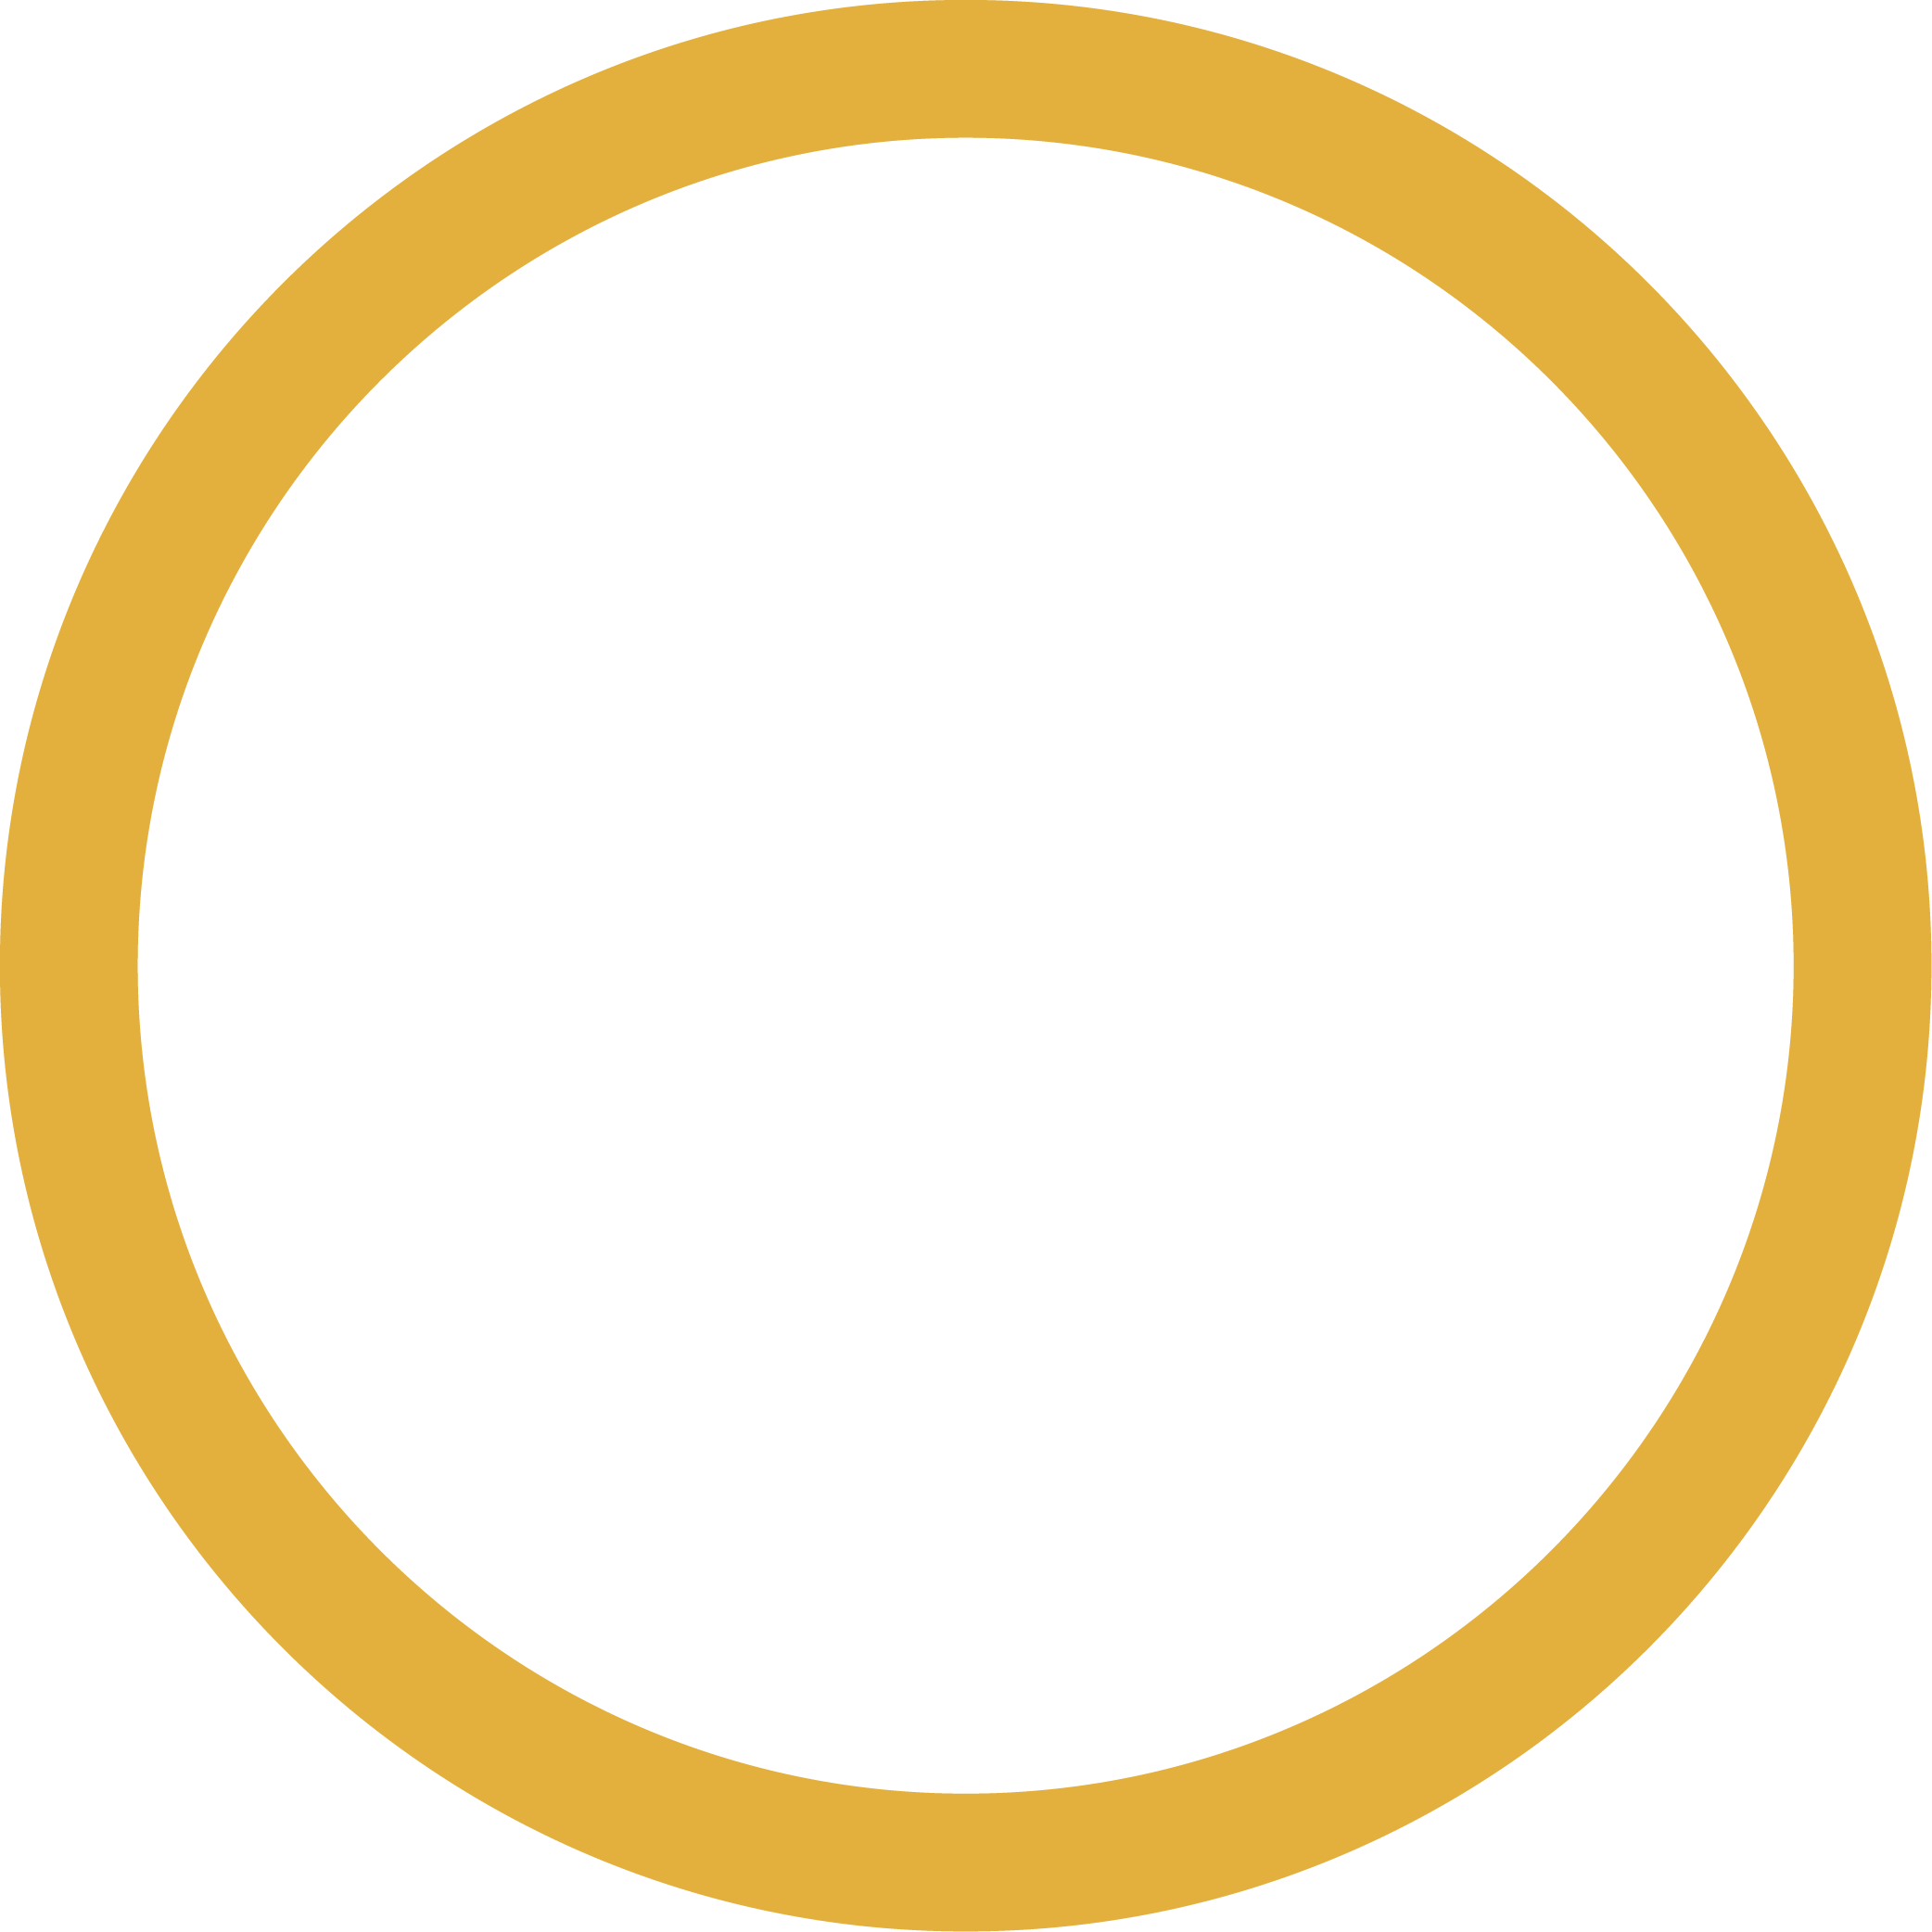 Icon of a Magnifying Glass Denoting the Investigation Phase of Our Brand Building Methodology